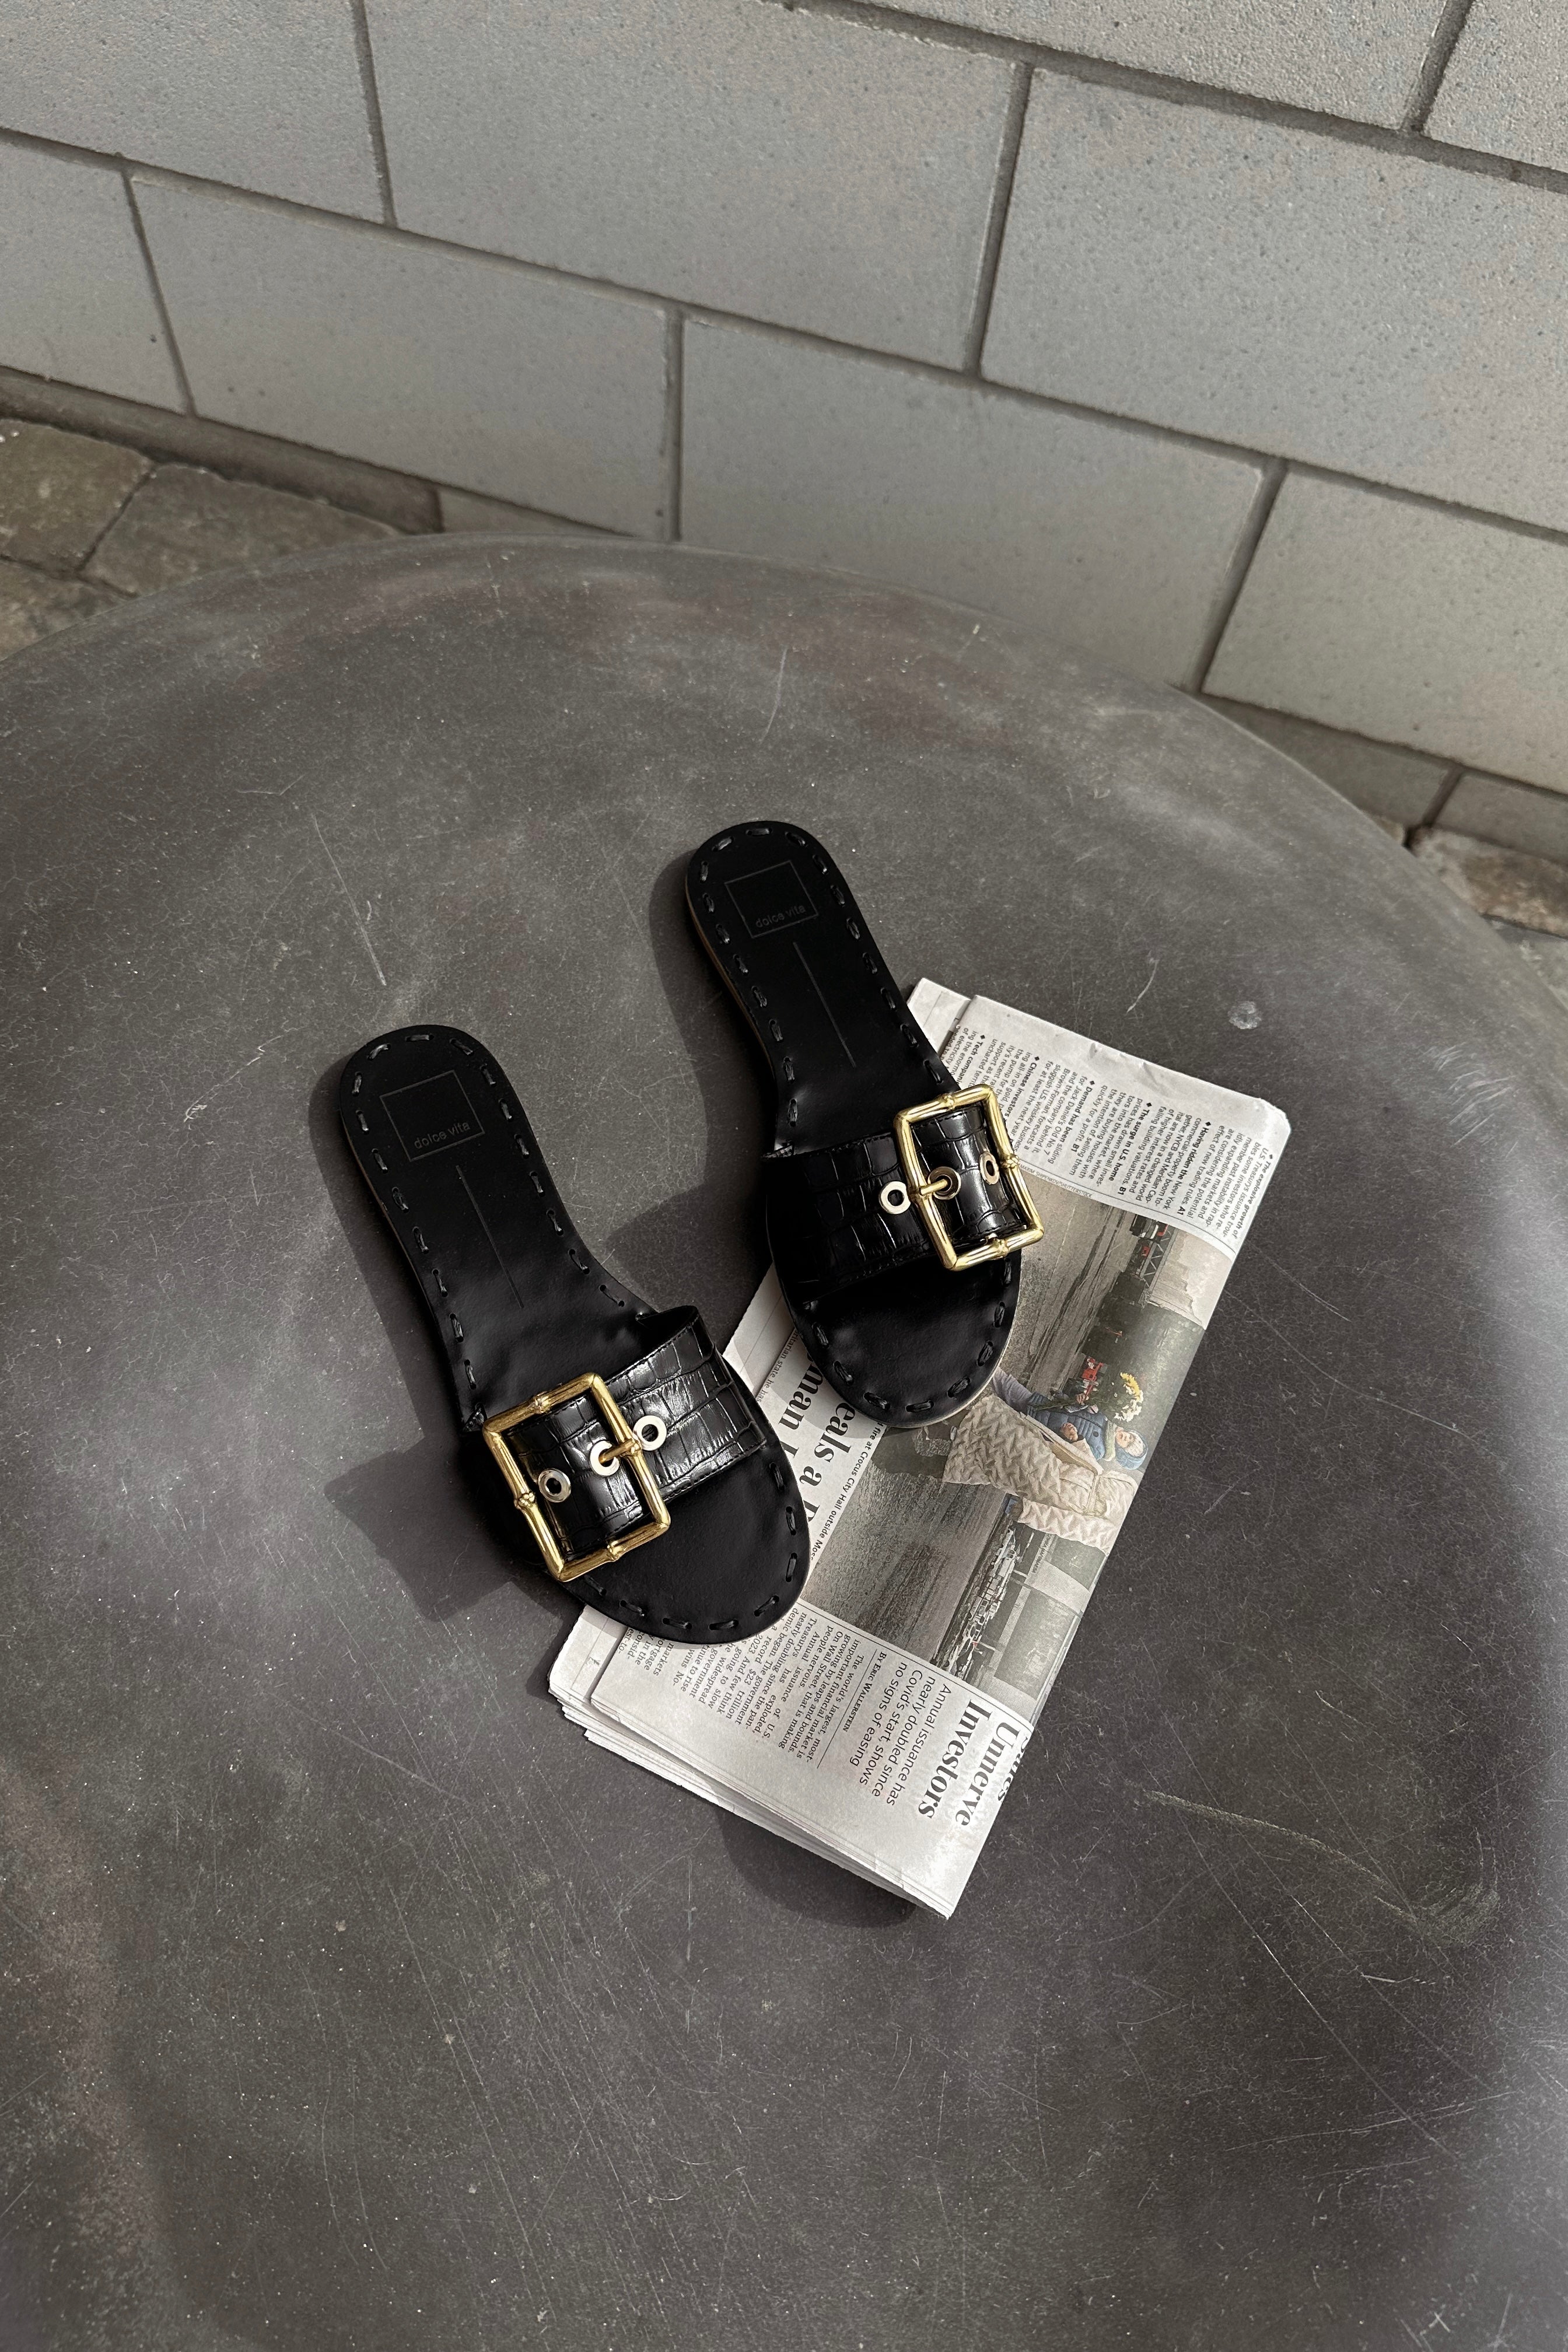 Front close up view of the Dasa Slide Sandal in Black which features Single Leather Strap, Gold Bamboo Buckle Detail and Slide-On Style. The shoe is laying over a newspaper under a black marble rock.